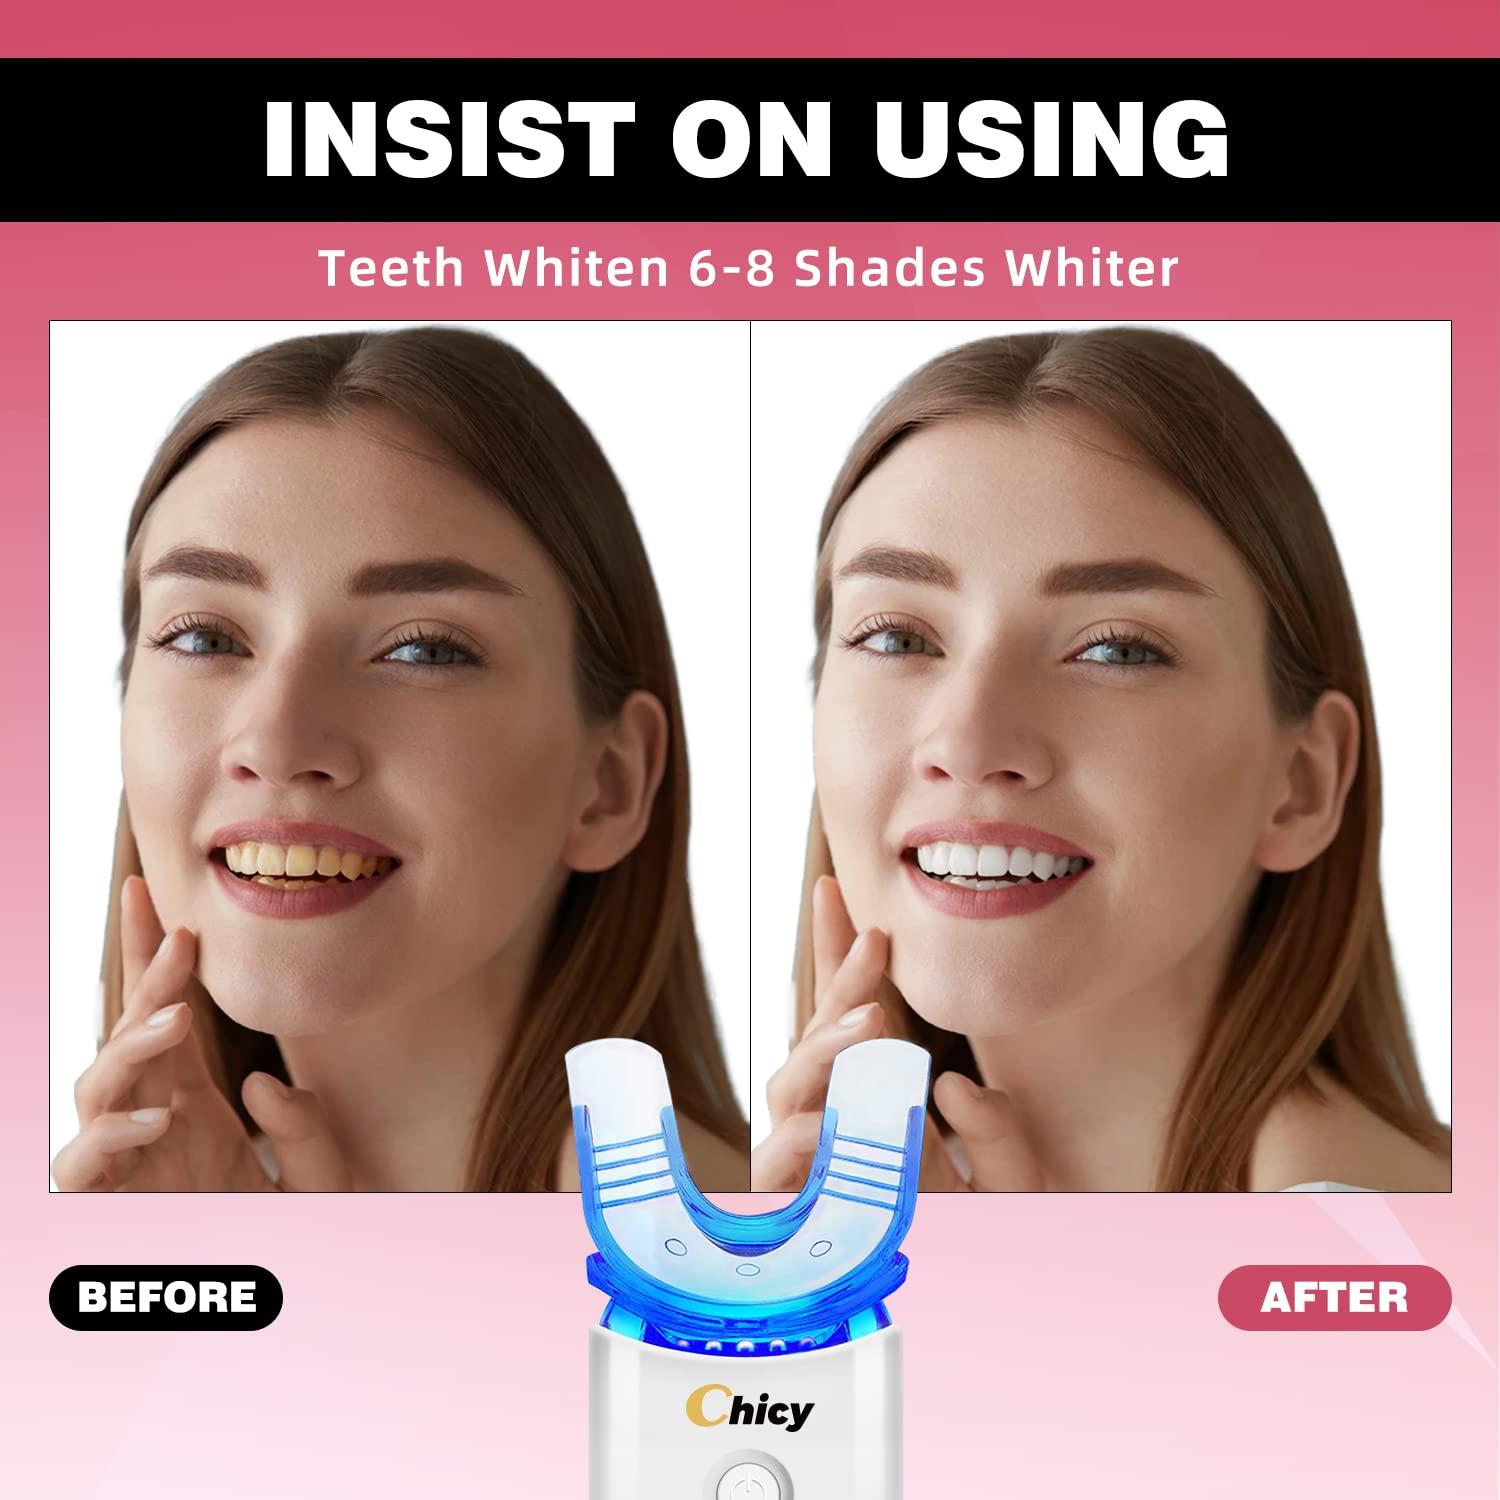 CHICY Teeth Whitening Kit, Teeth Whitening Gel with LED Accelerator Light  and Tray Teeth Whitener Helps to Remove Stains from Coffee, Smoking, Wines,  Soda, Food